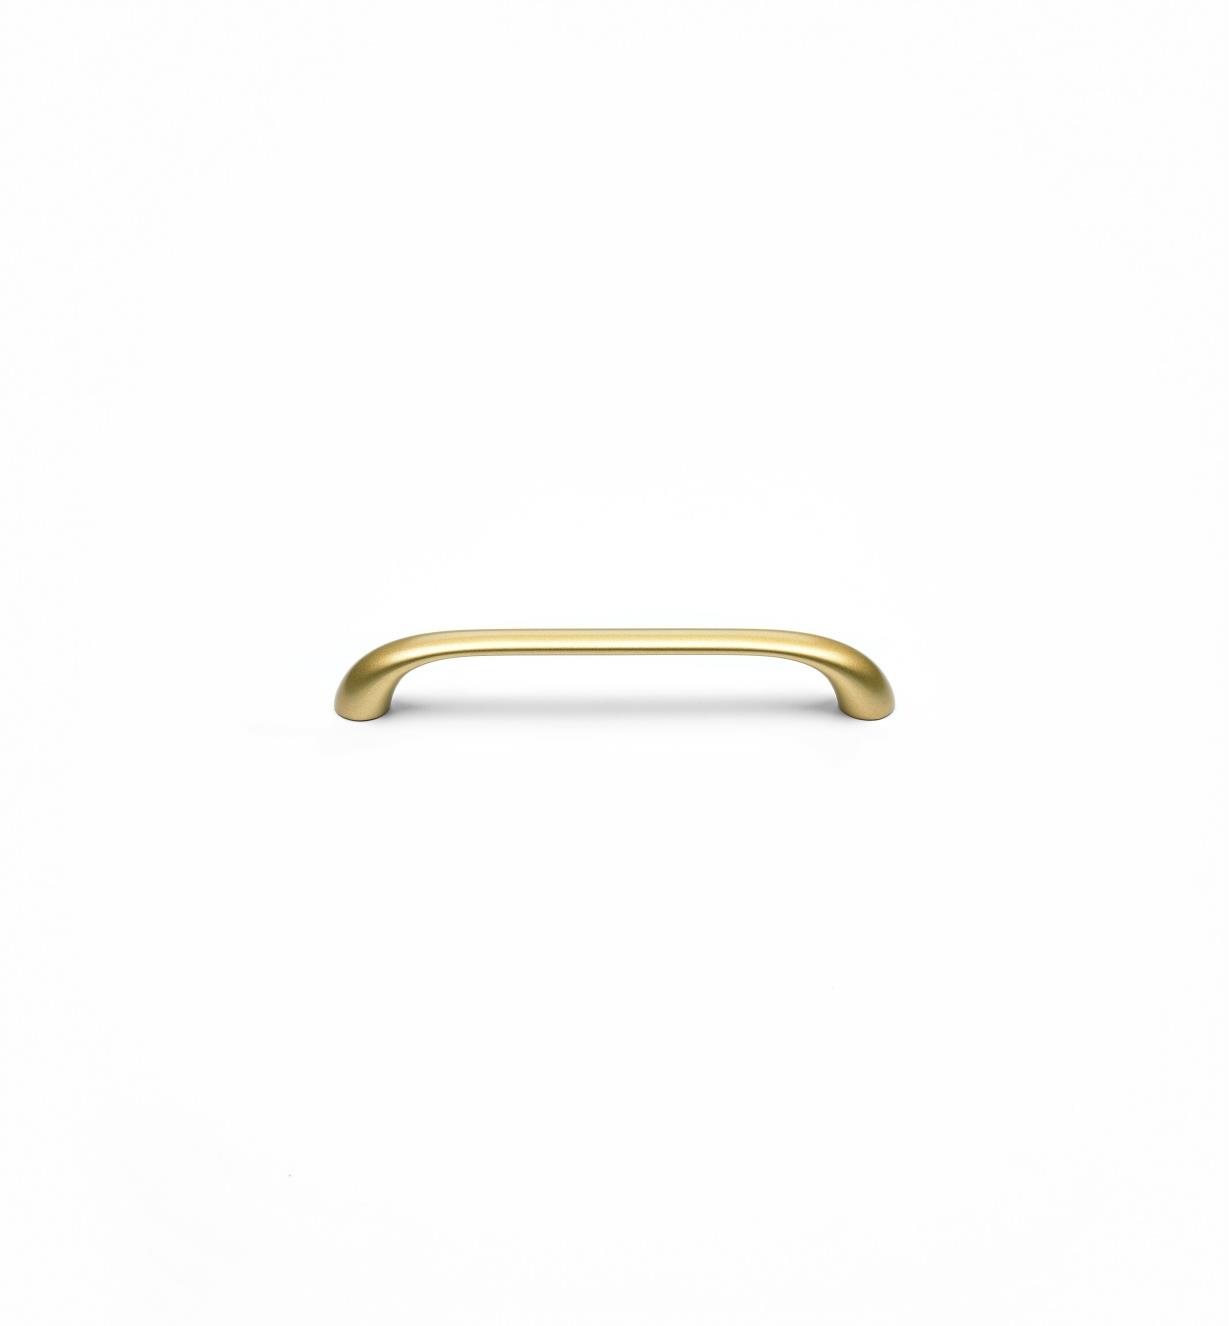 00A2947 - 160mm Gold Handle